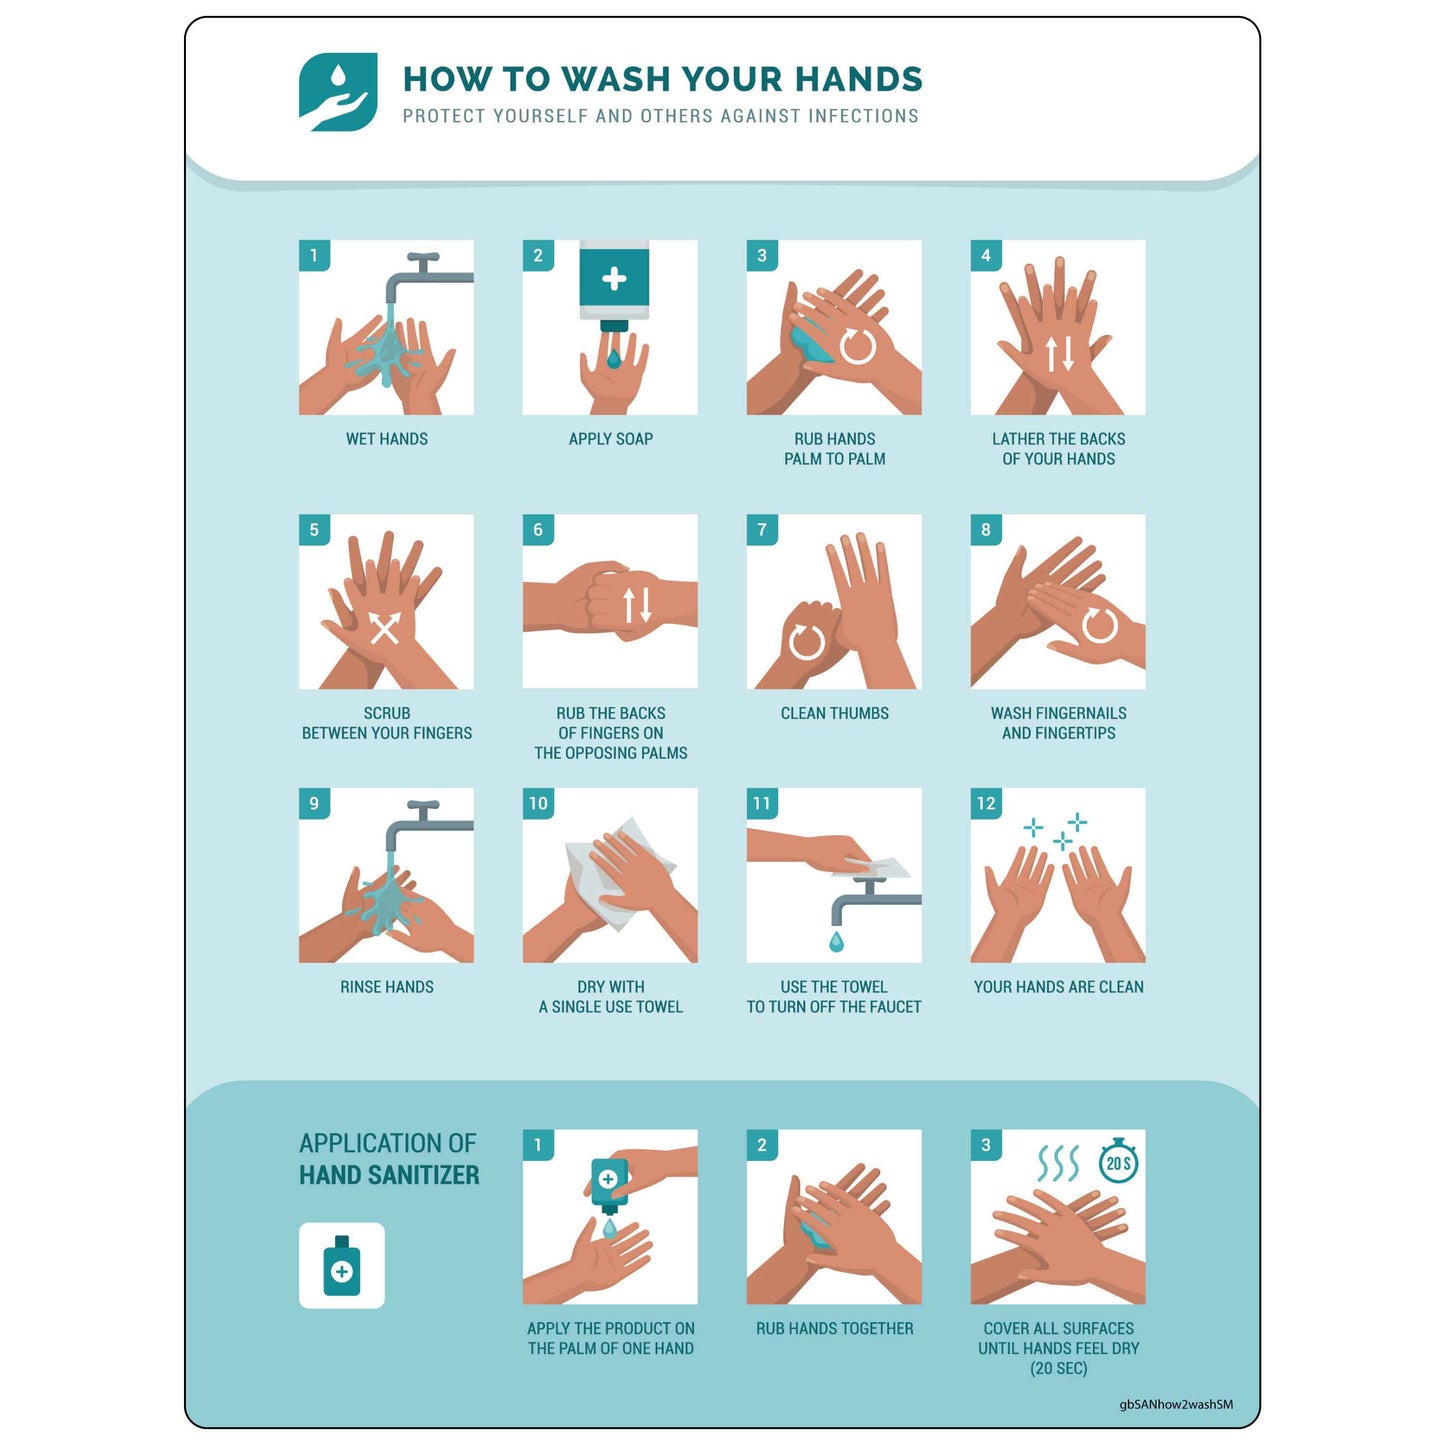 How to Wash Your Hands Decal. 8 inches by 10.5 inches in size.